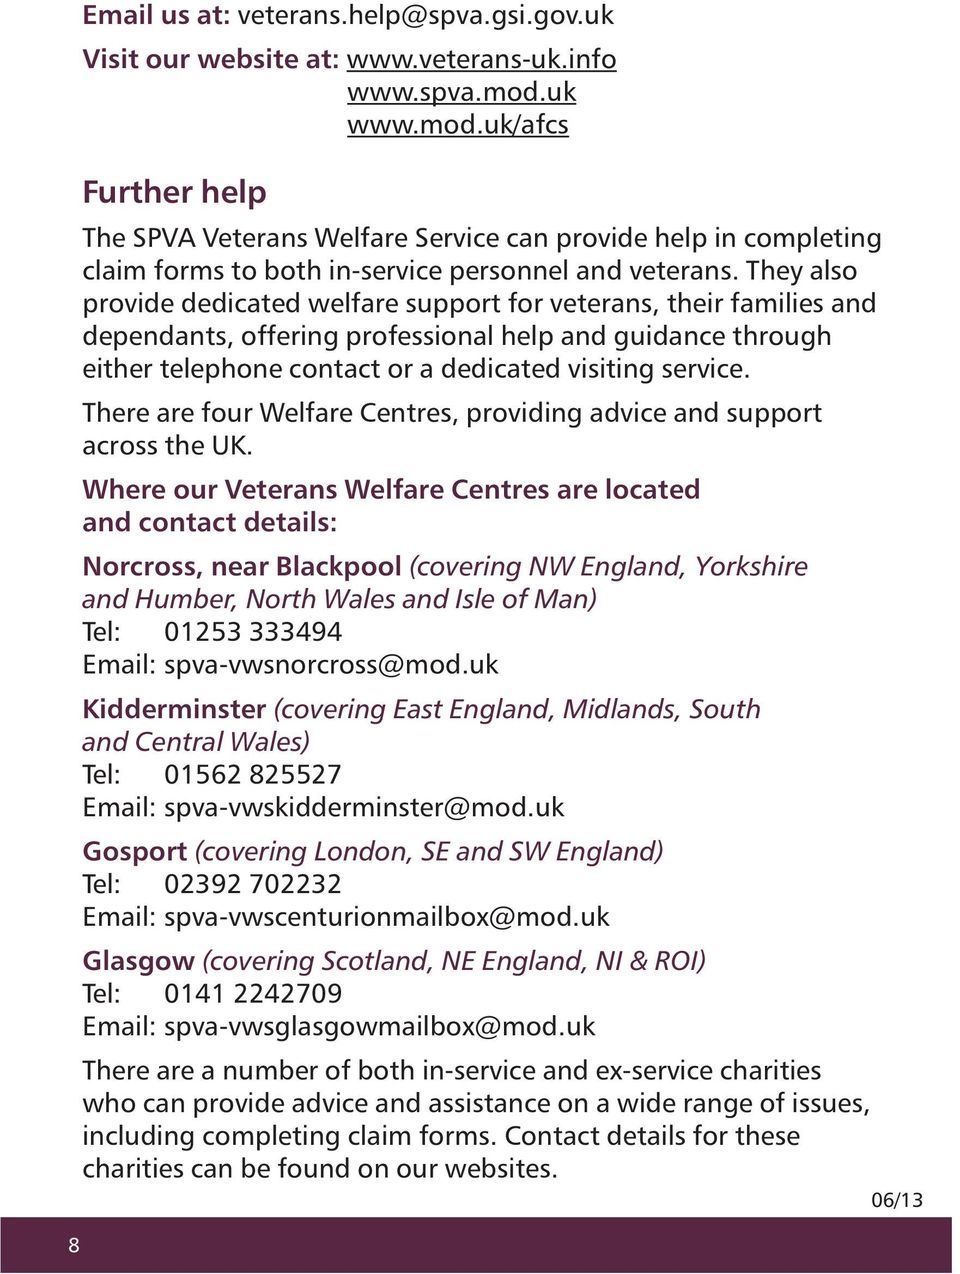 They also provide dedicated welfare support for veterans, their families and dependants, offering professional help and guidance through either telephone contact or a dedicated visiting service.